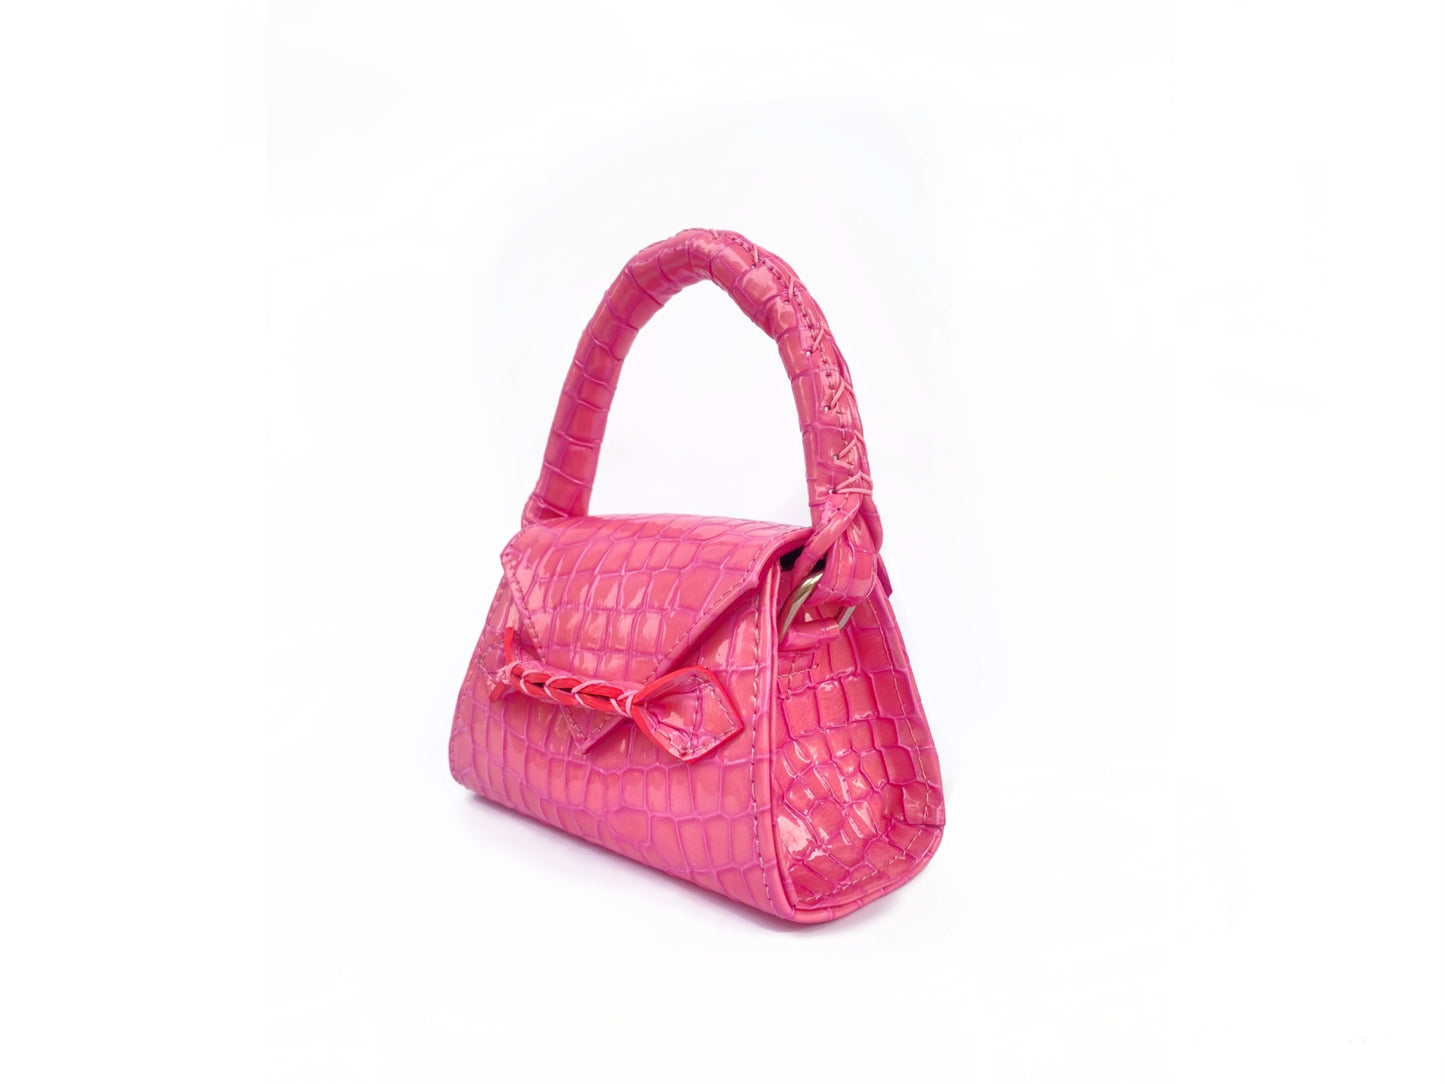 PINK PATENT CROC MICRO ESE TOP HANDLE